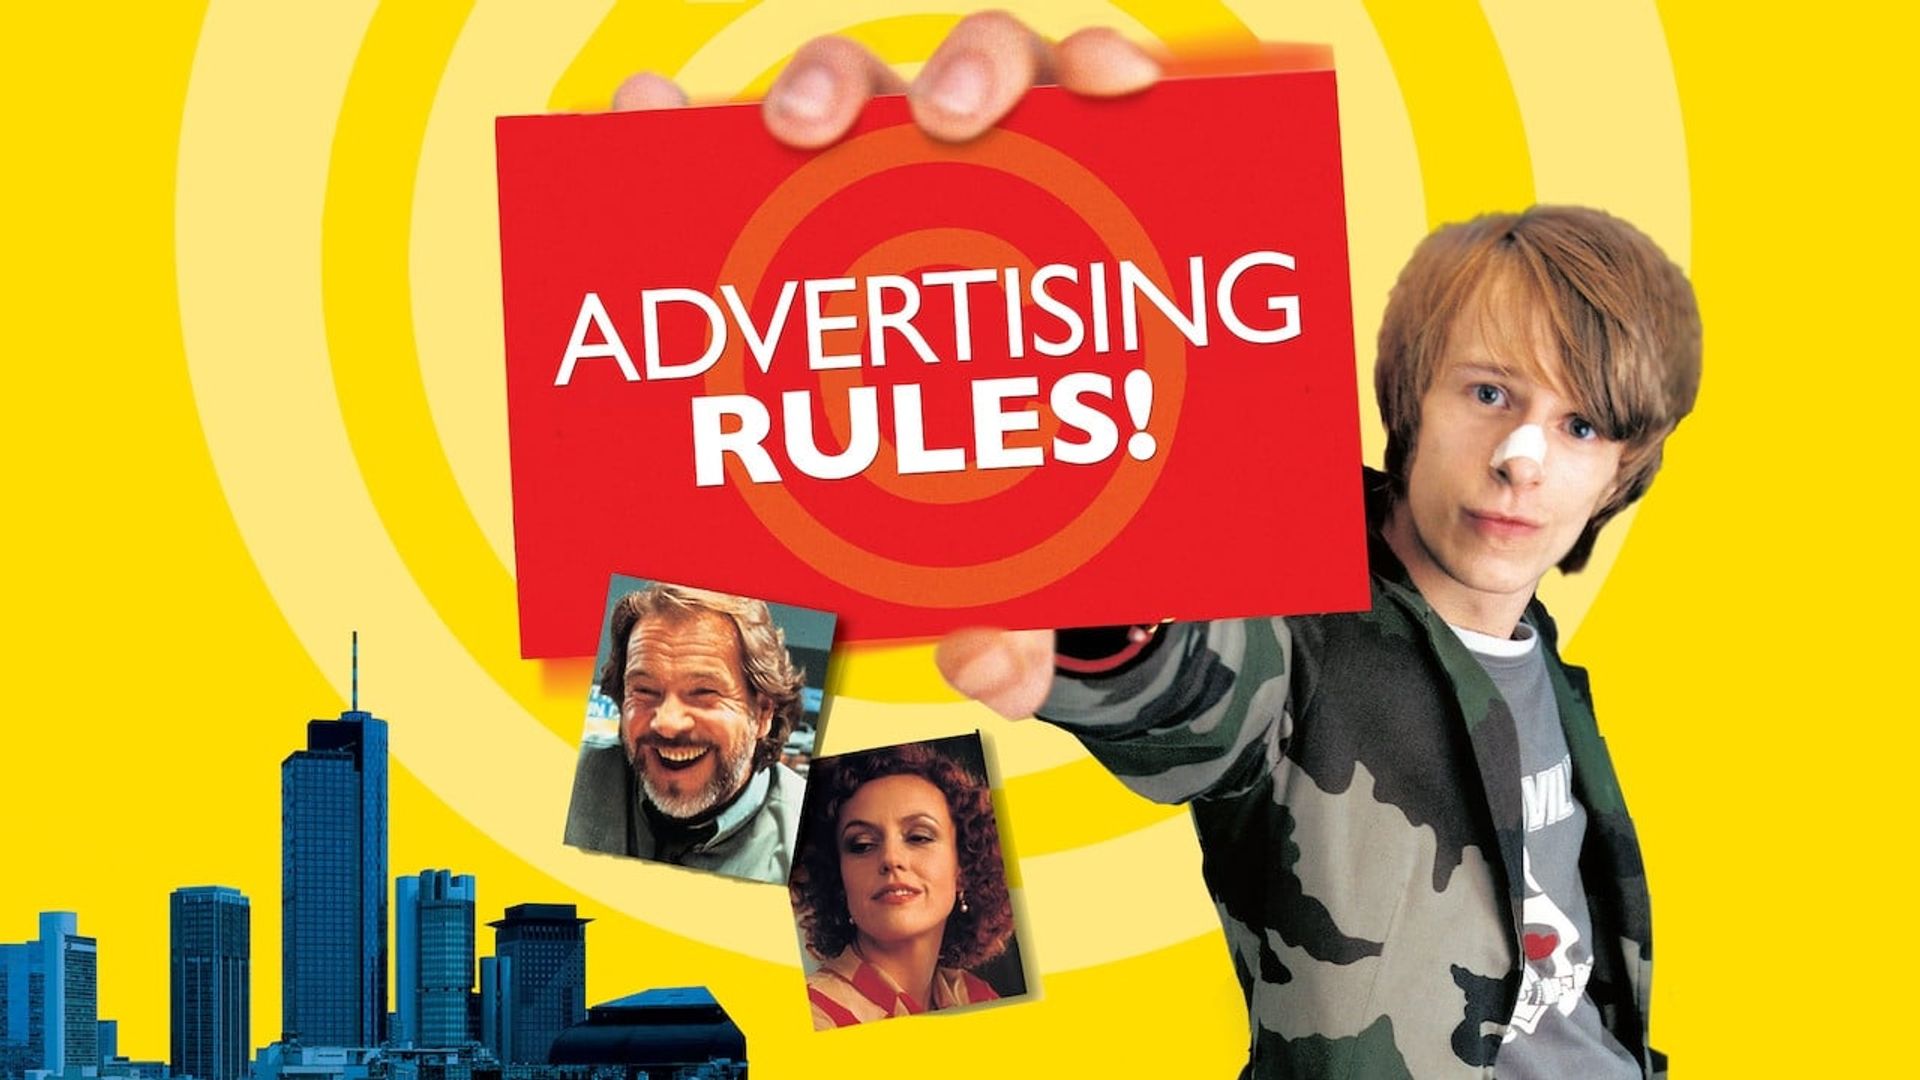 Advertising Rules! background